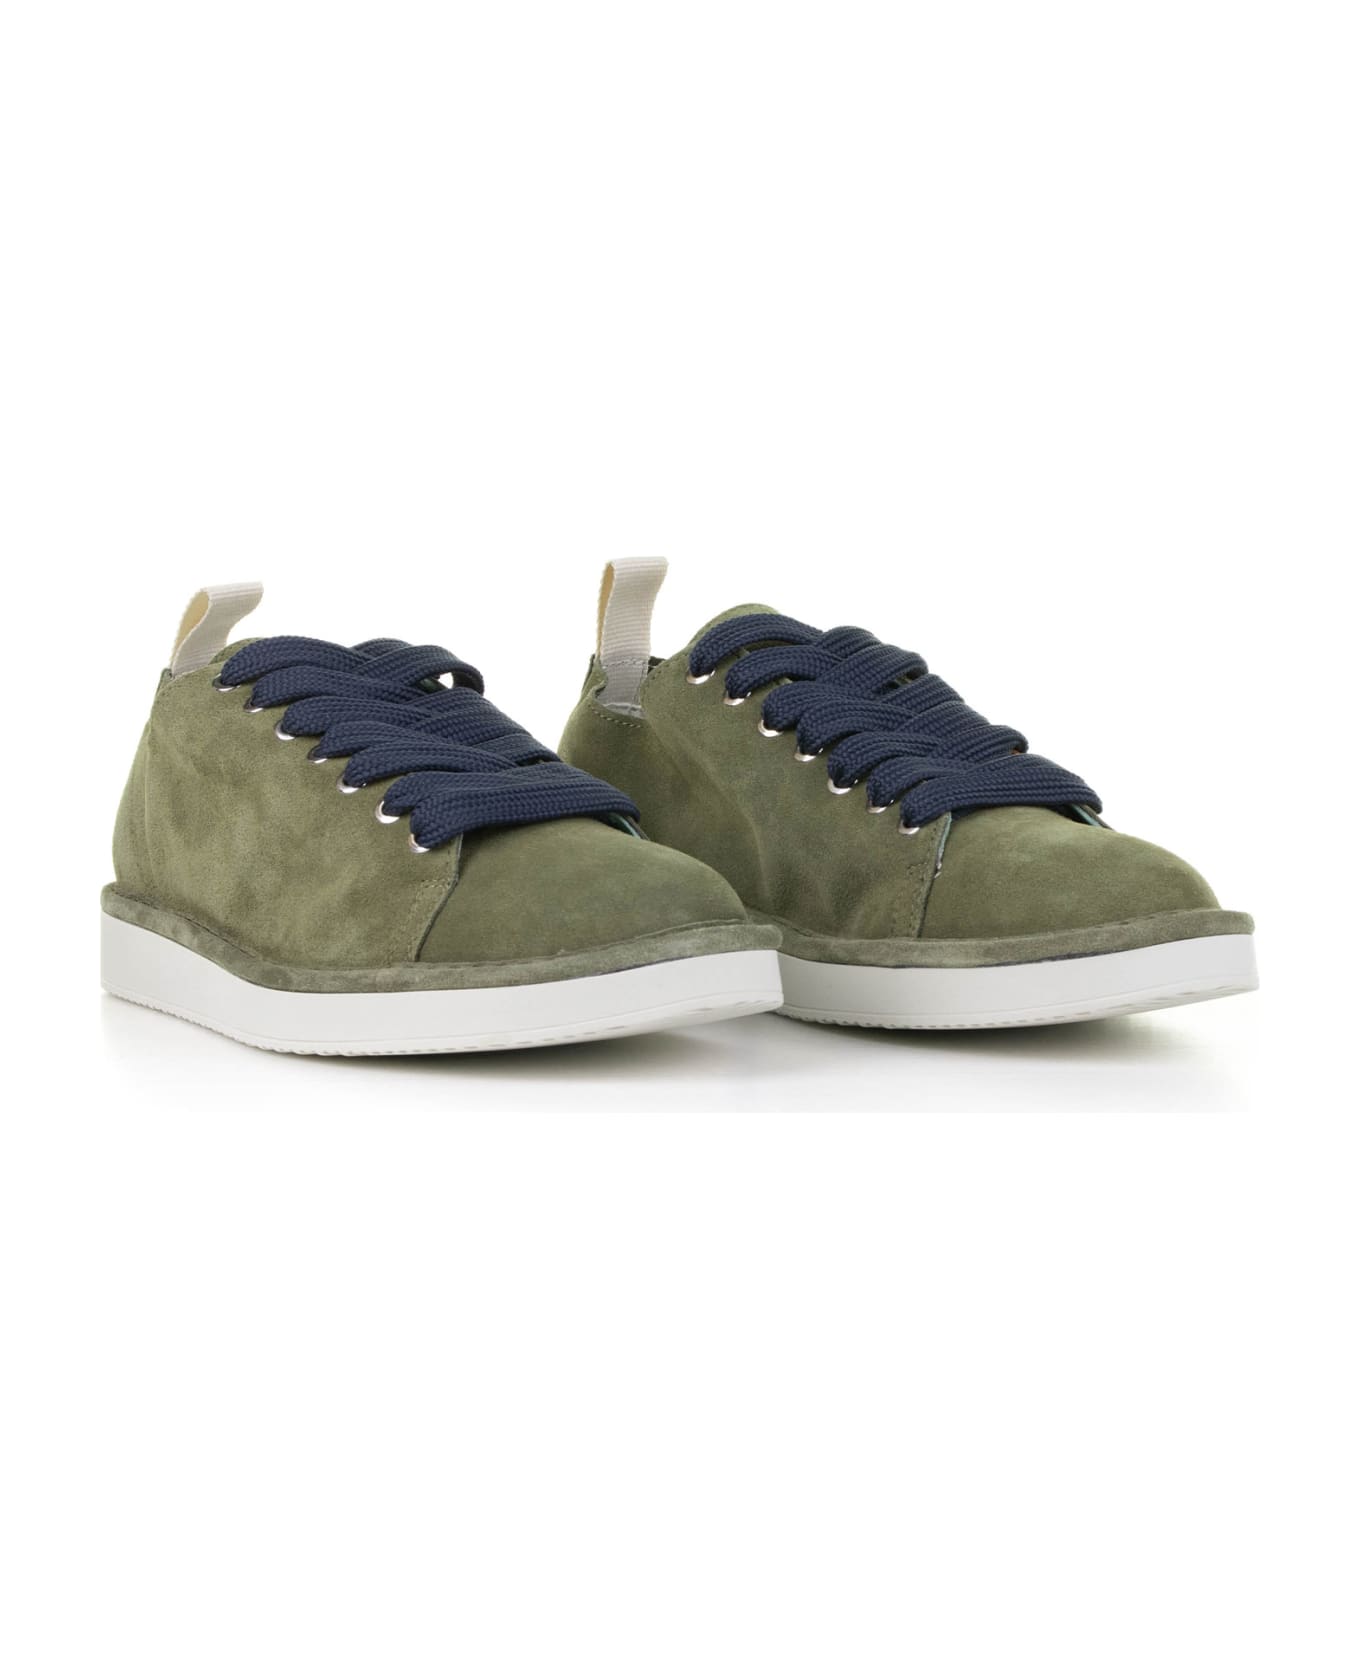 Panchic Sneaker In Military Green Suede - FOREST-NIGHT COBALT スニーカー